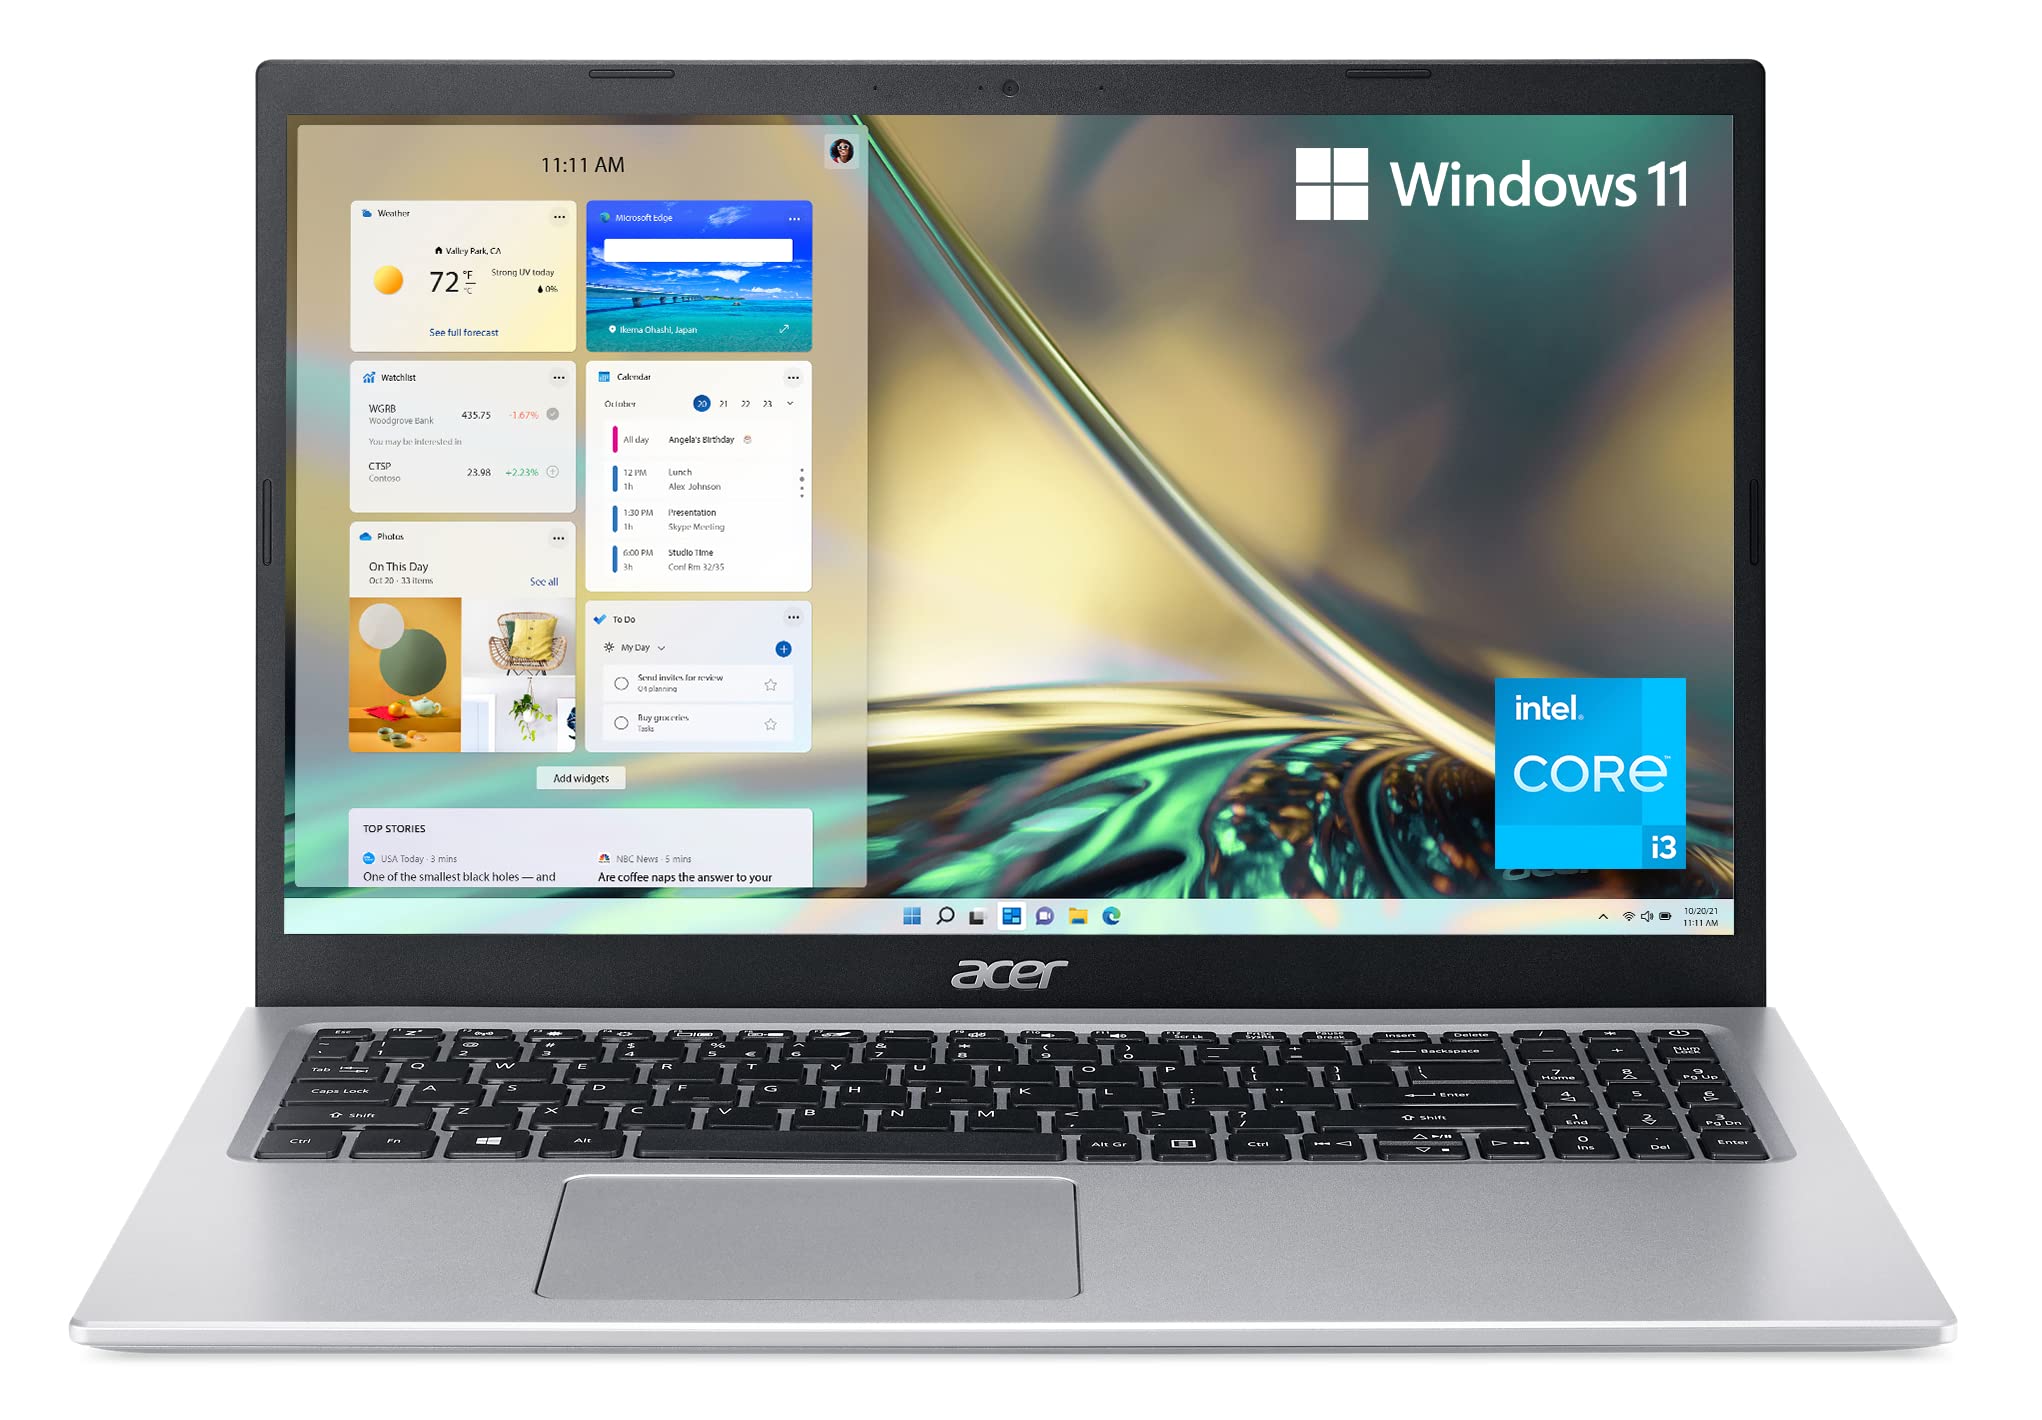 Go to Acer's official website and navigate to the drivers and manuals section for your specific Acer Aspire 5 model.
Download the latest BIOS update file for your laptop.